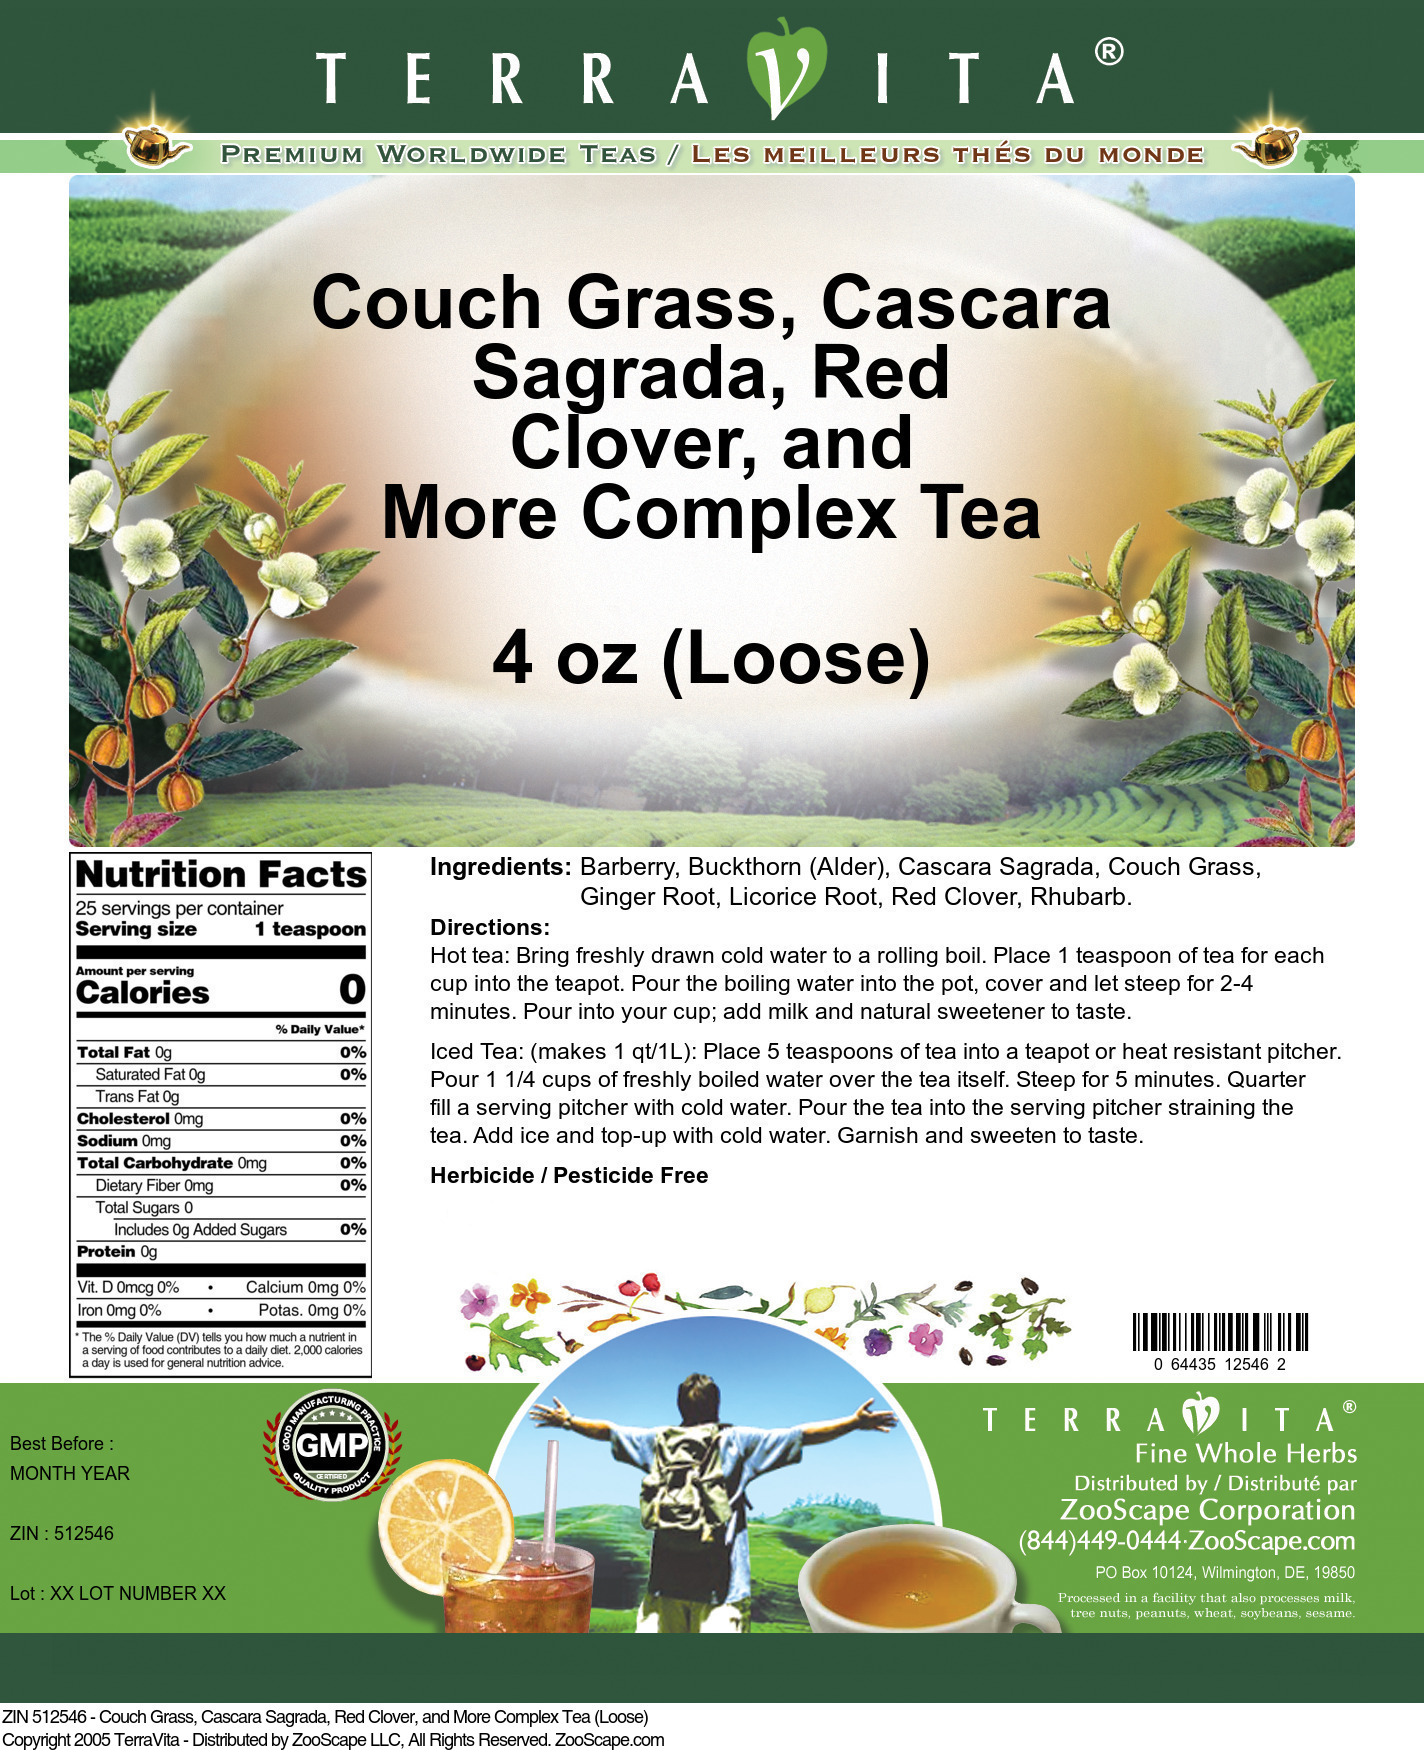 Couch Grass, Cascara Sagrada, Red Clover, and More Complex Tea (Loose) - Label